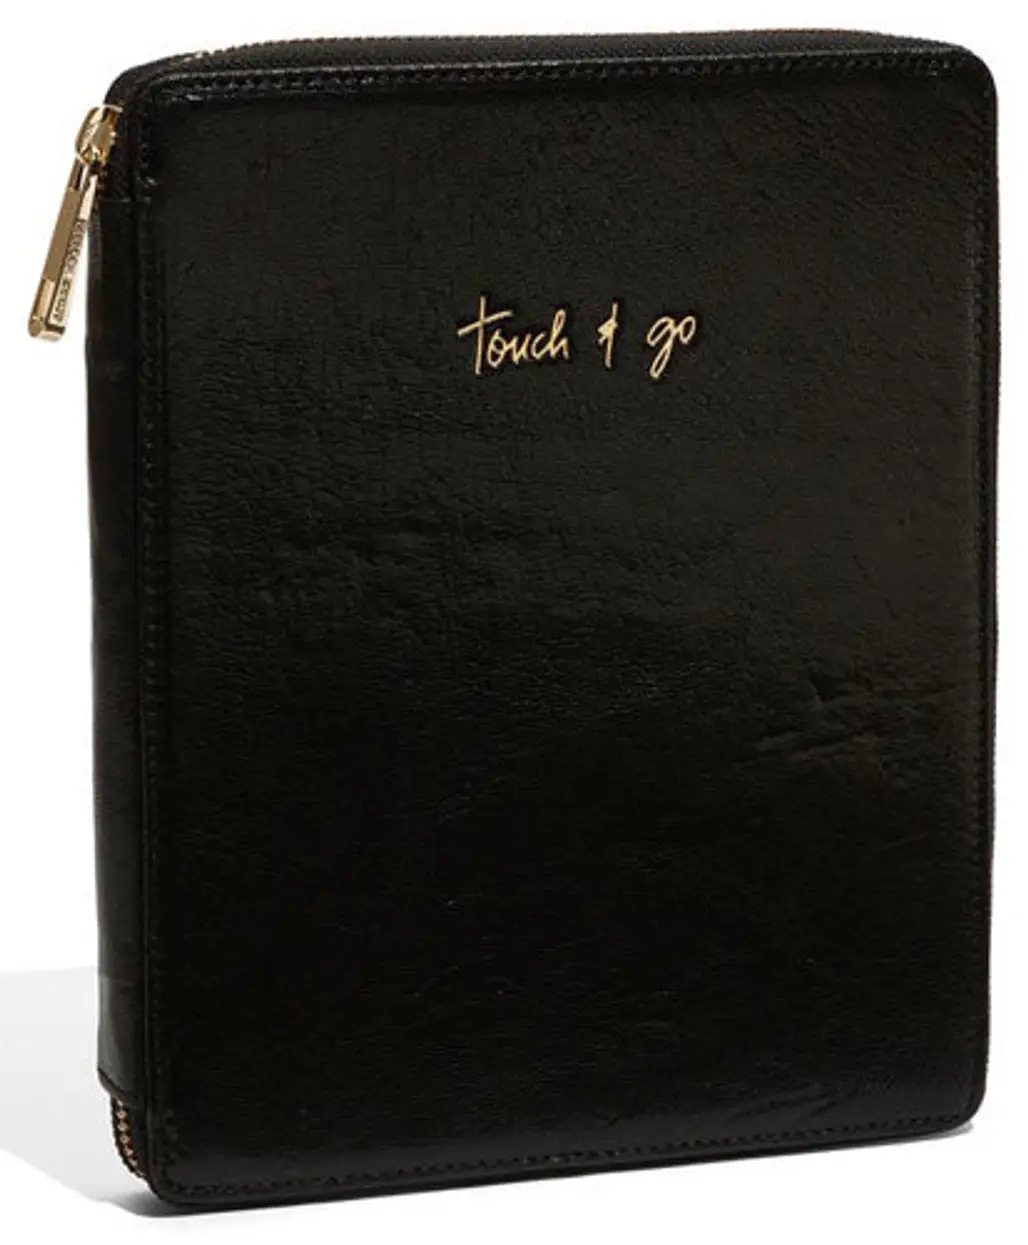 Rebecca Minkoff Touch and Go IPad Sleeve